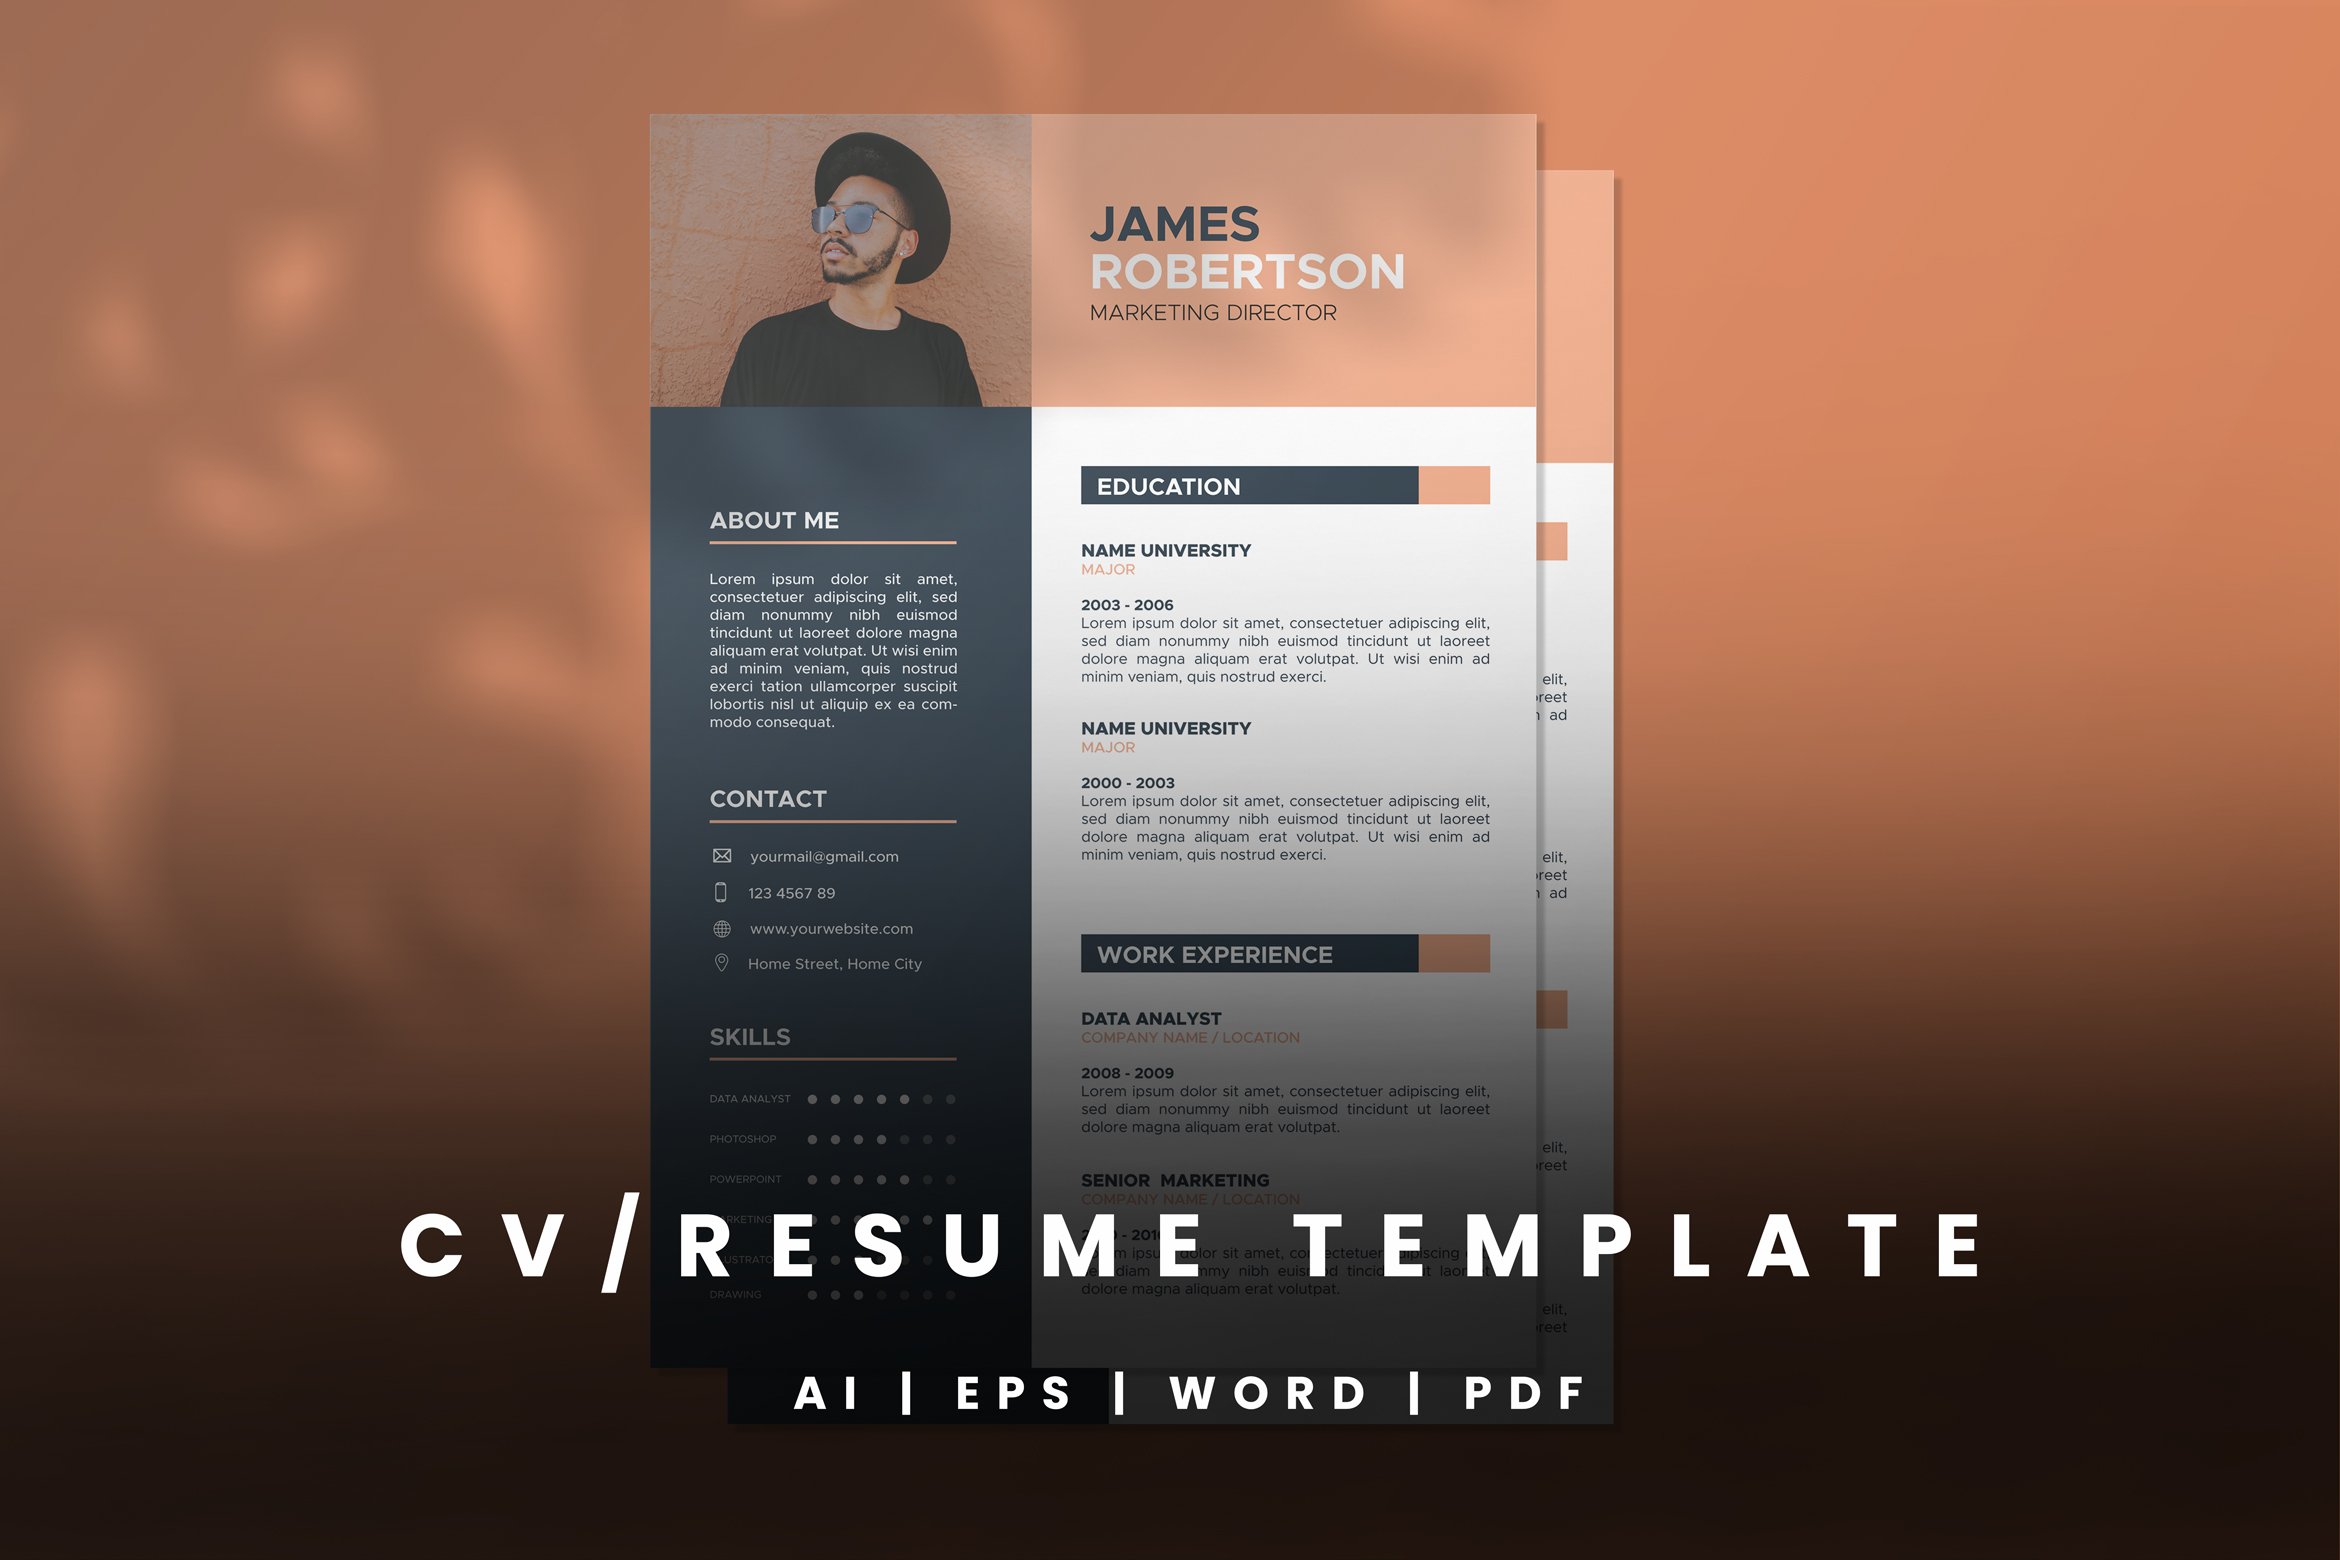 CV Resume Template - 05 cover image.